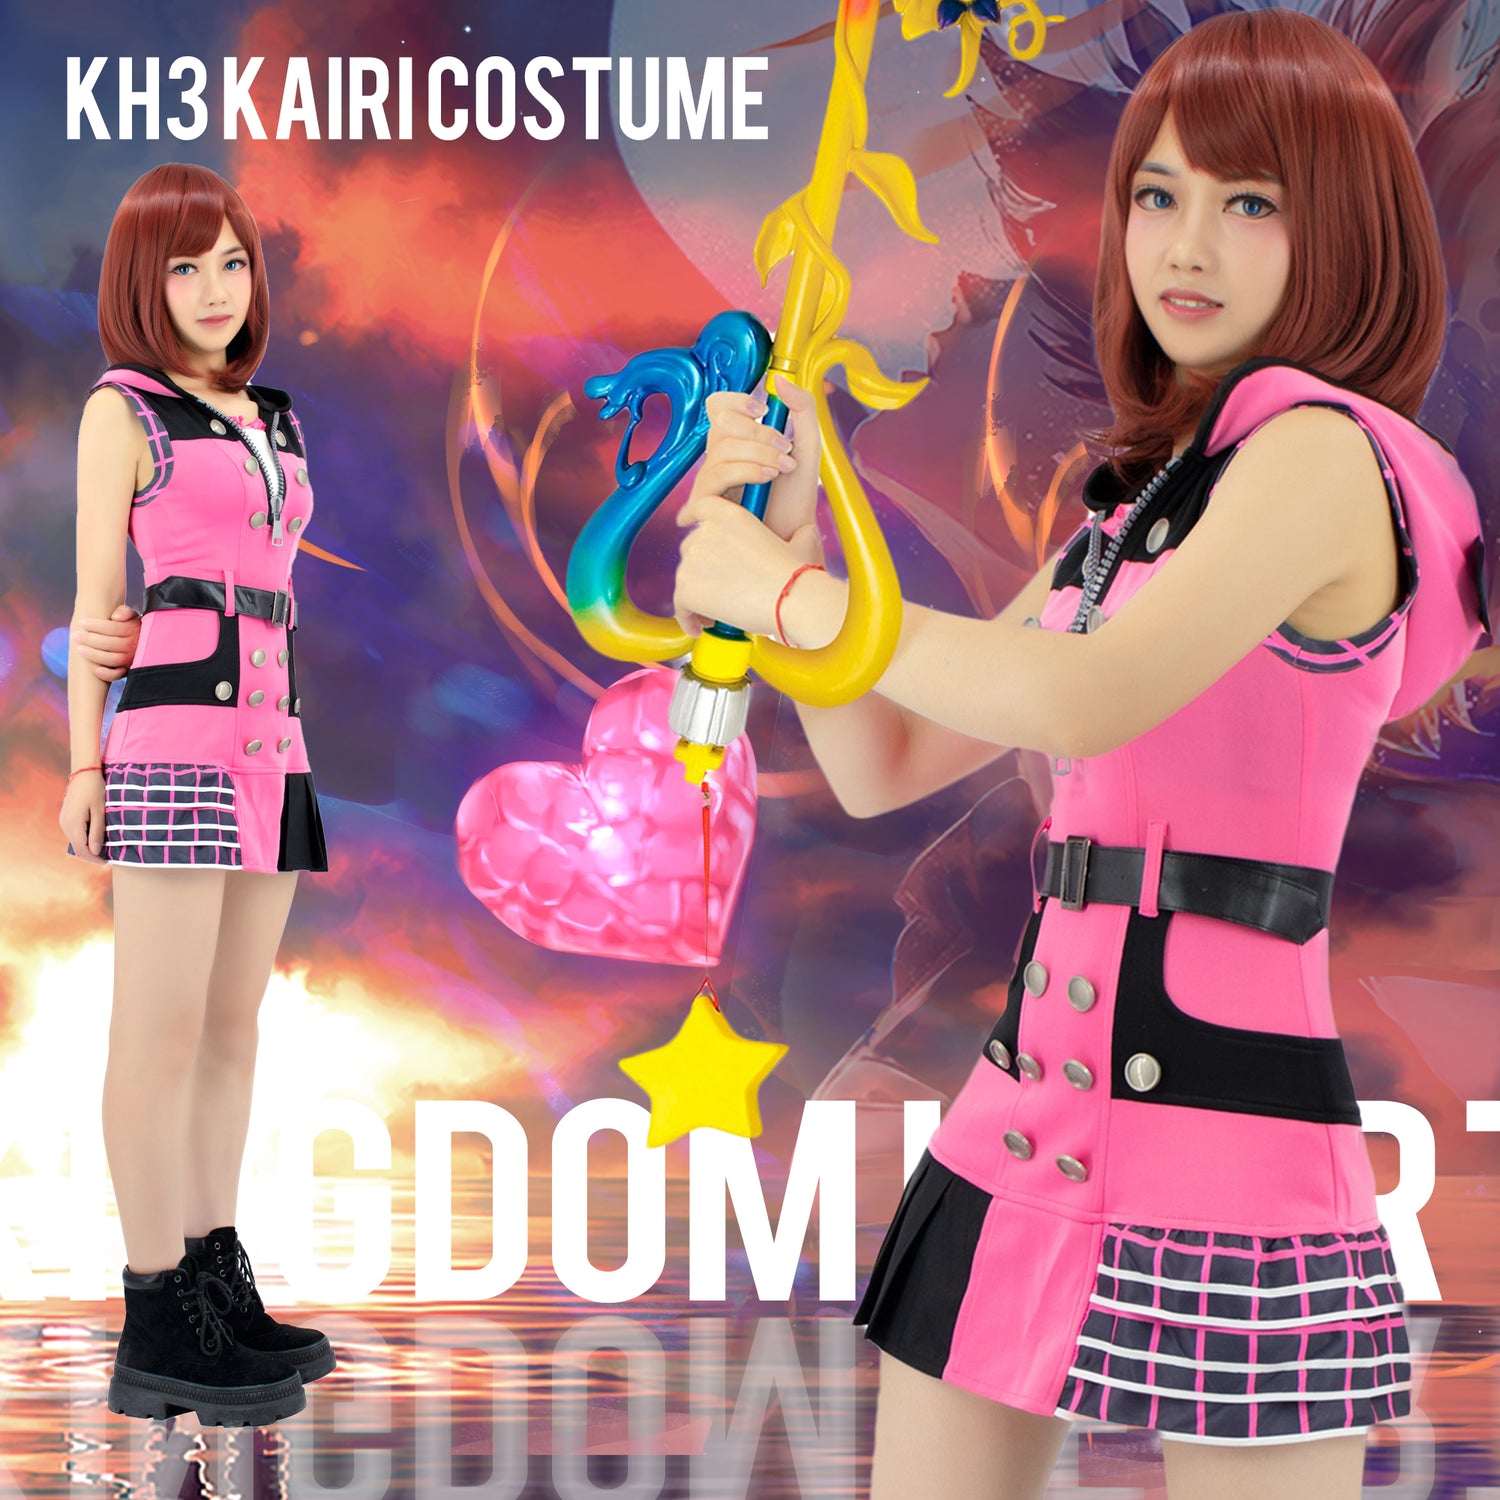 Thinking of Becoming Kairi for Your Next Cosplay? Dive into the World of Kingdom Hearts